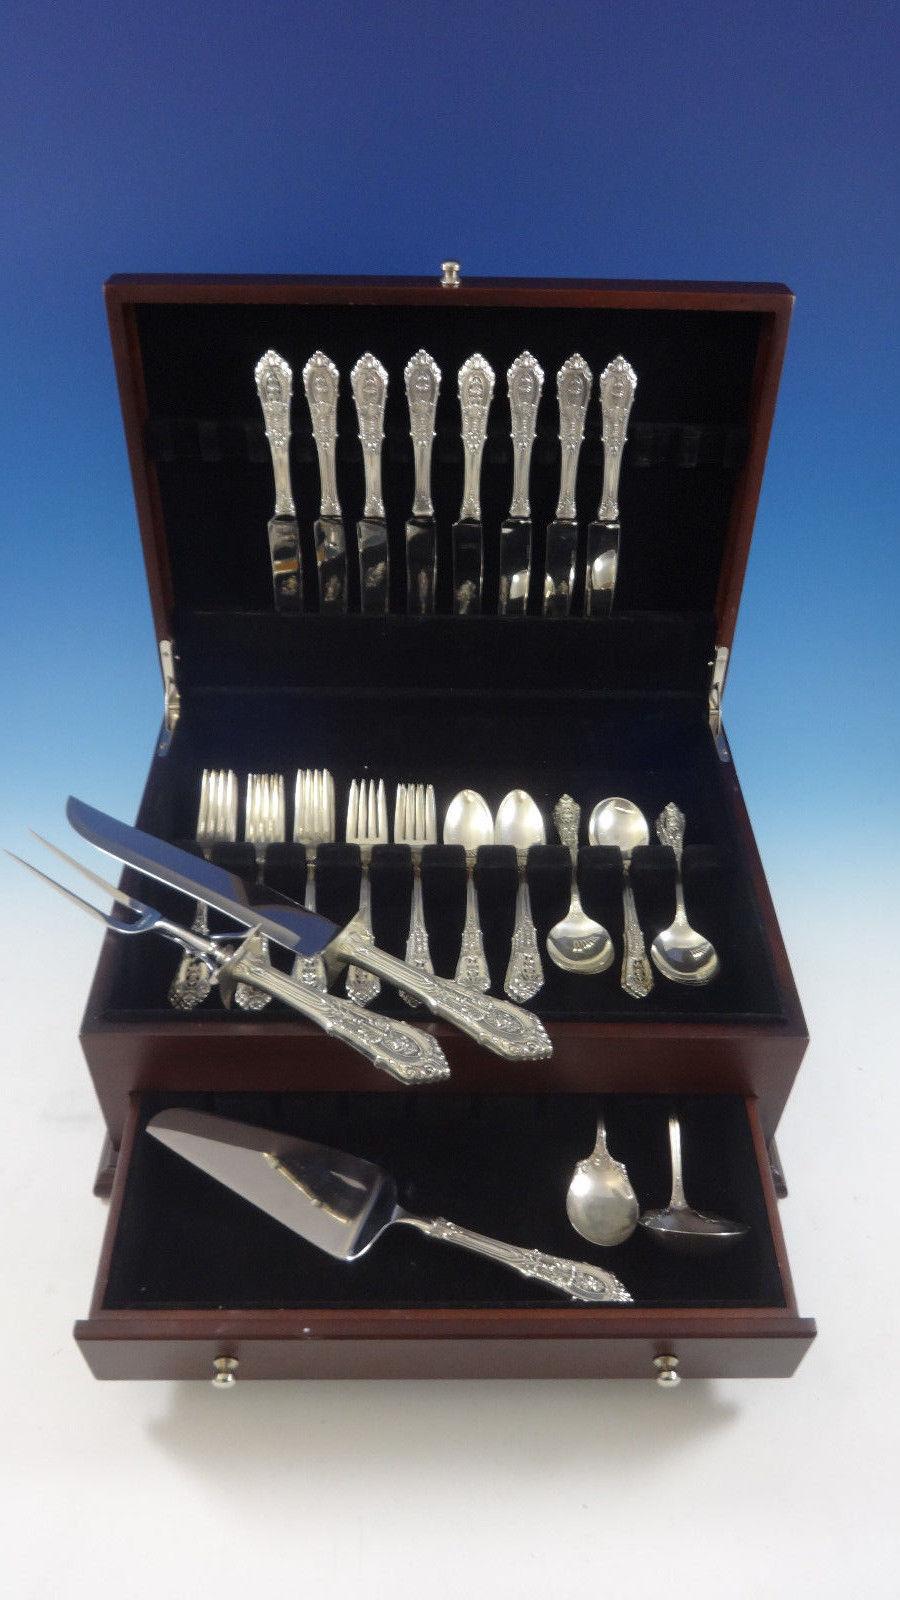 Rose Point by Wallace sterling silver flatware set, 45 pieces. This set includes:

8 knives, 9 1/8